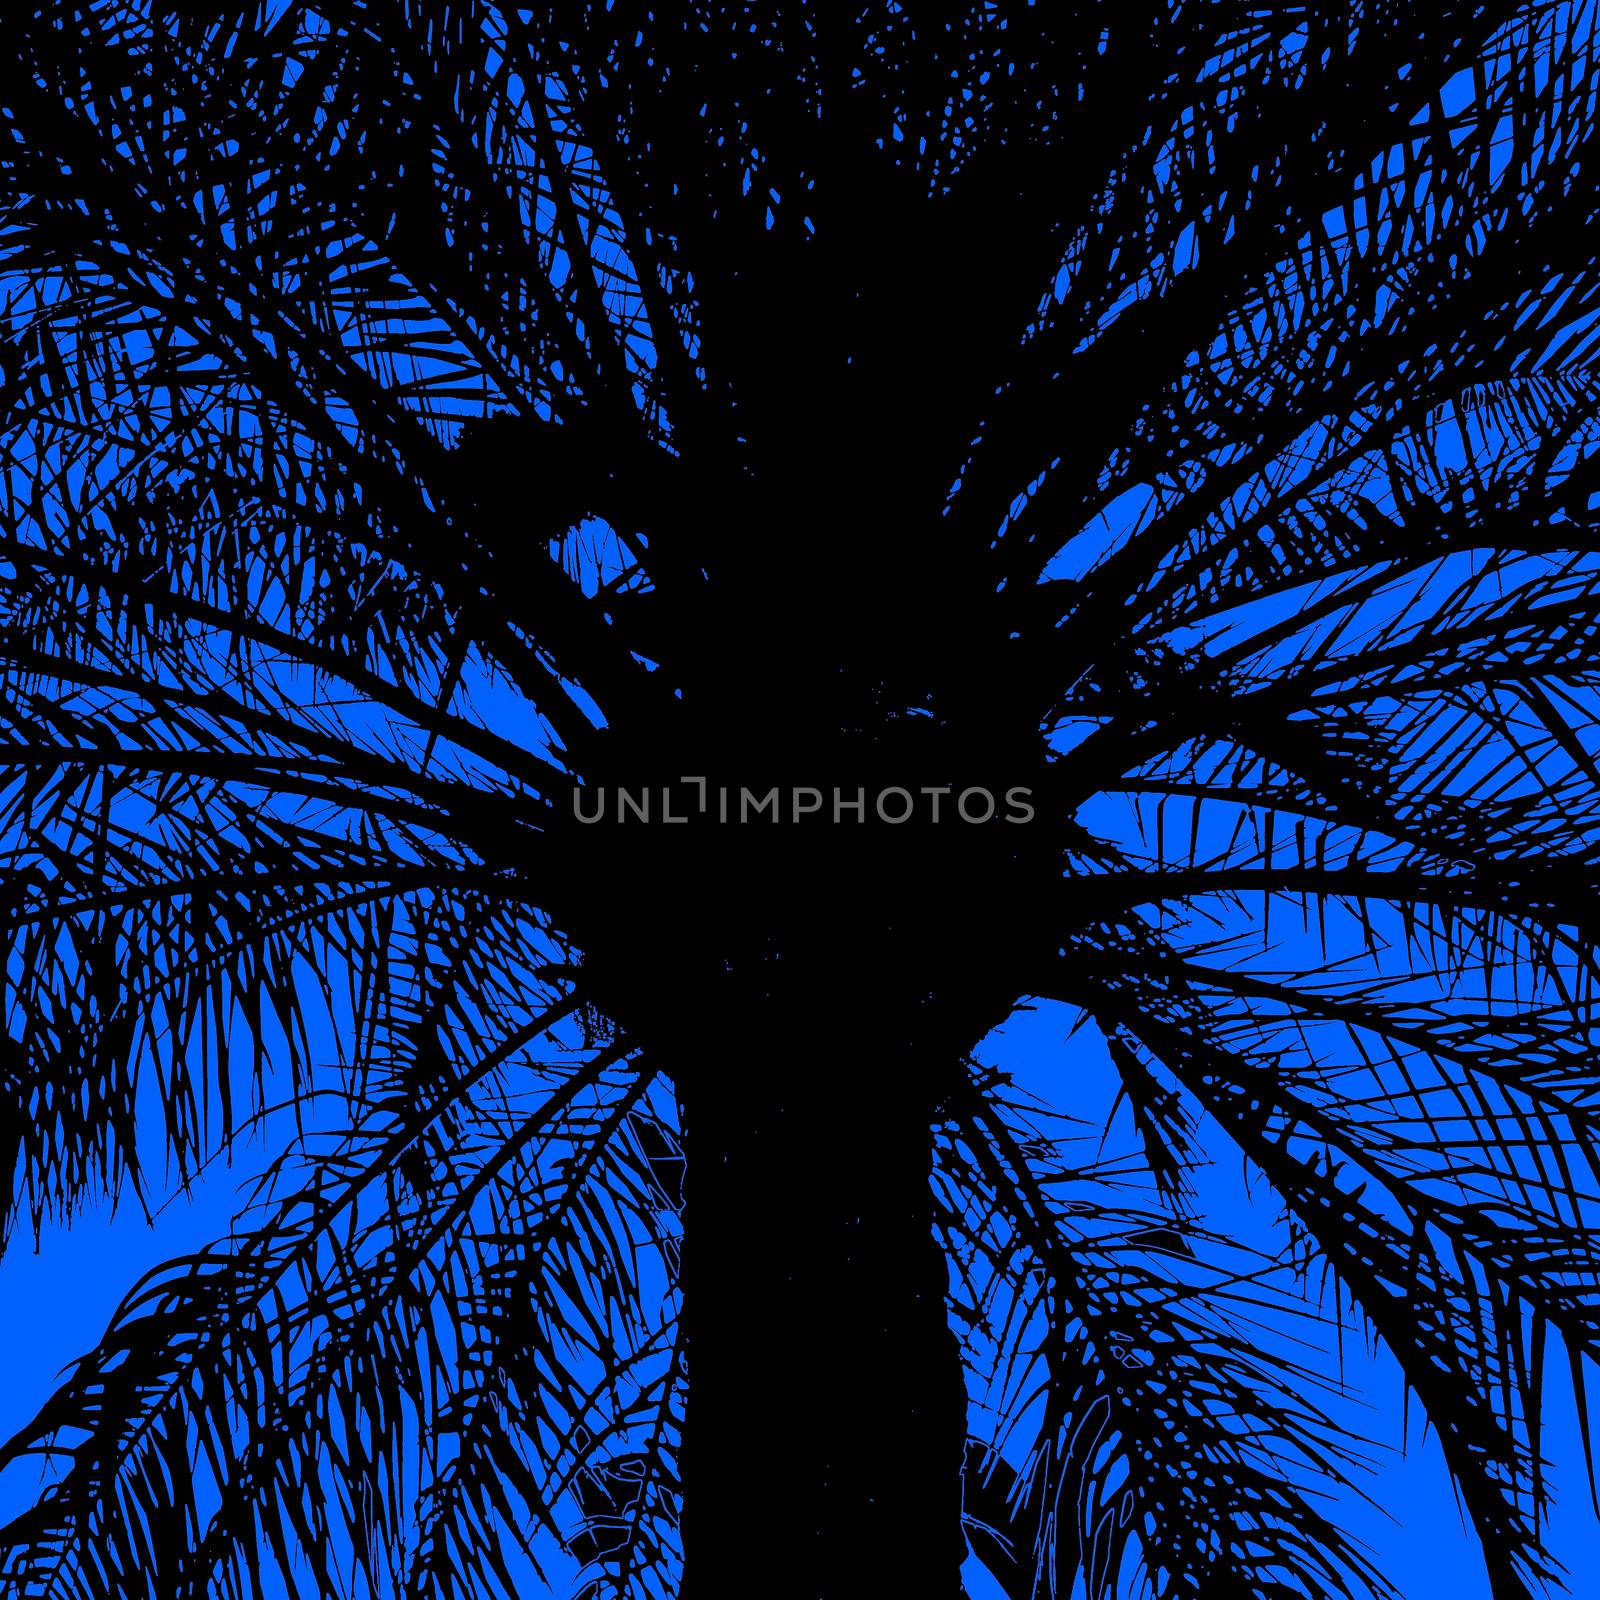 Abstract black silhouette of a large palm tree in the back light, with dark blue background, photographed on the beach of Aqaba, Jordan, middle east